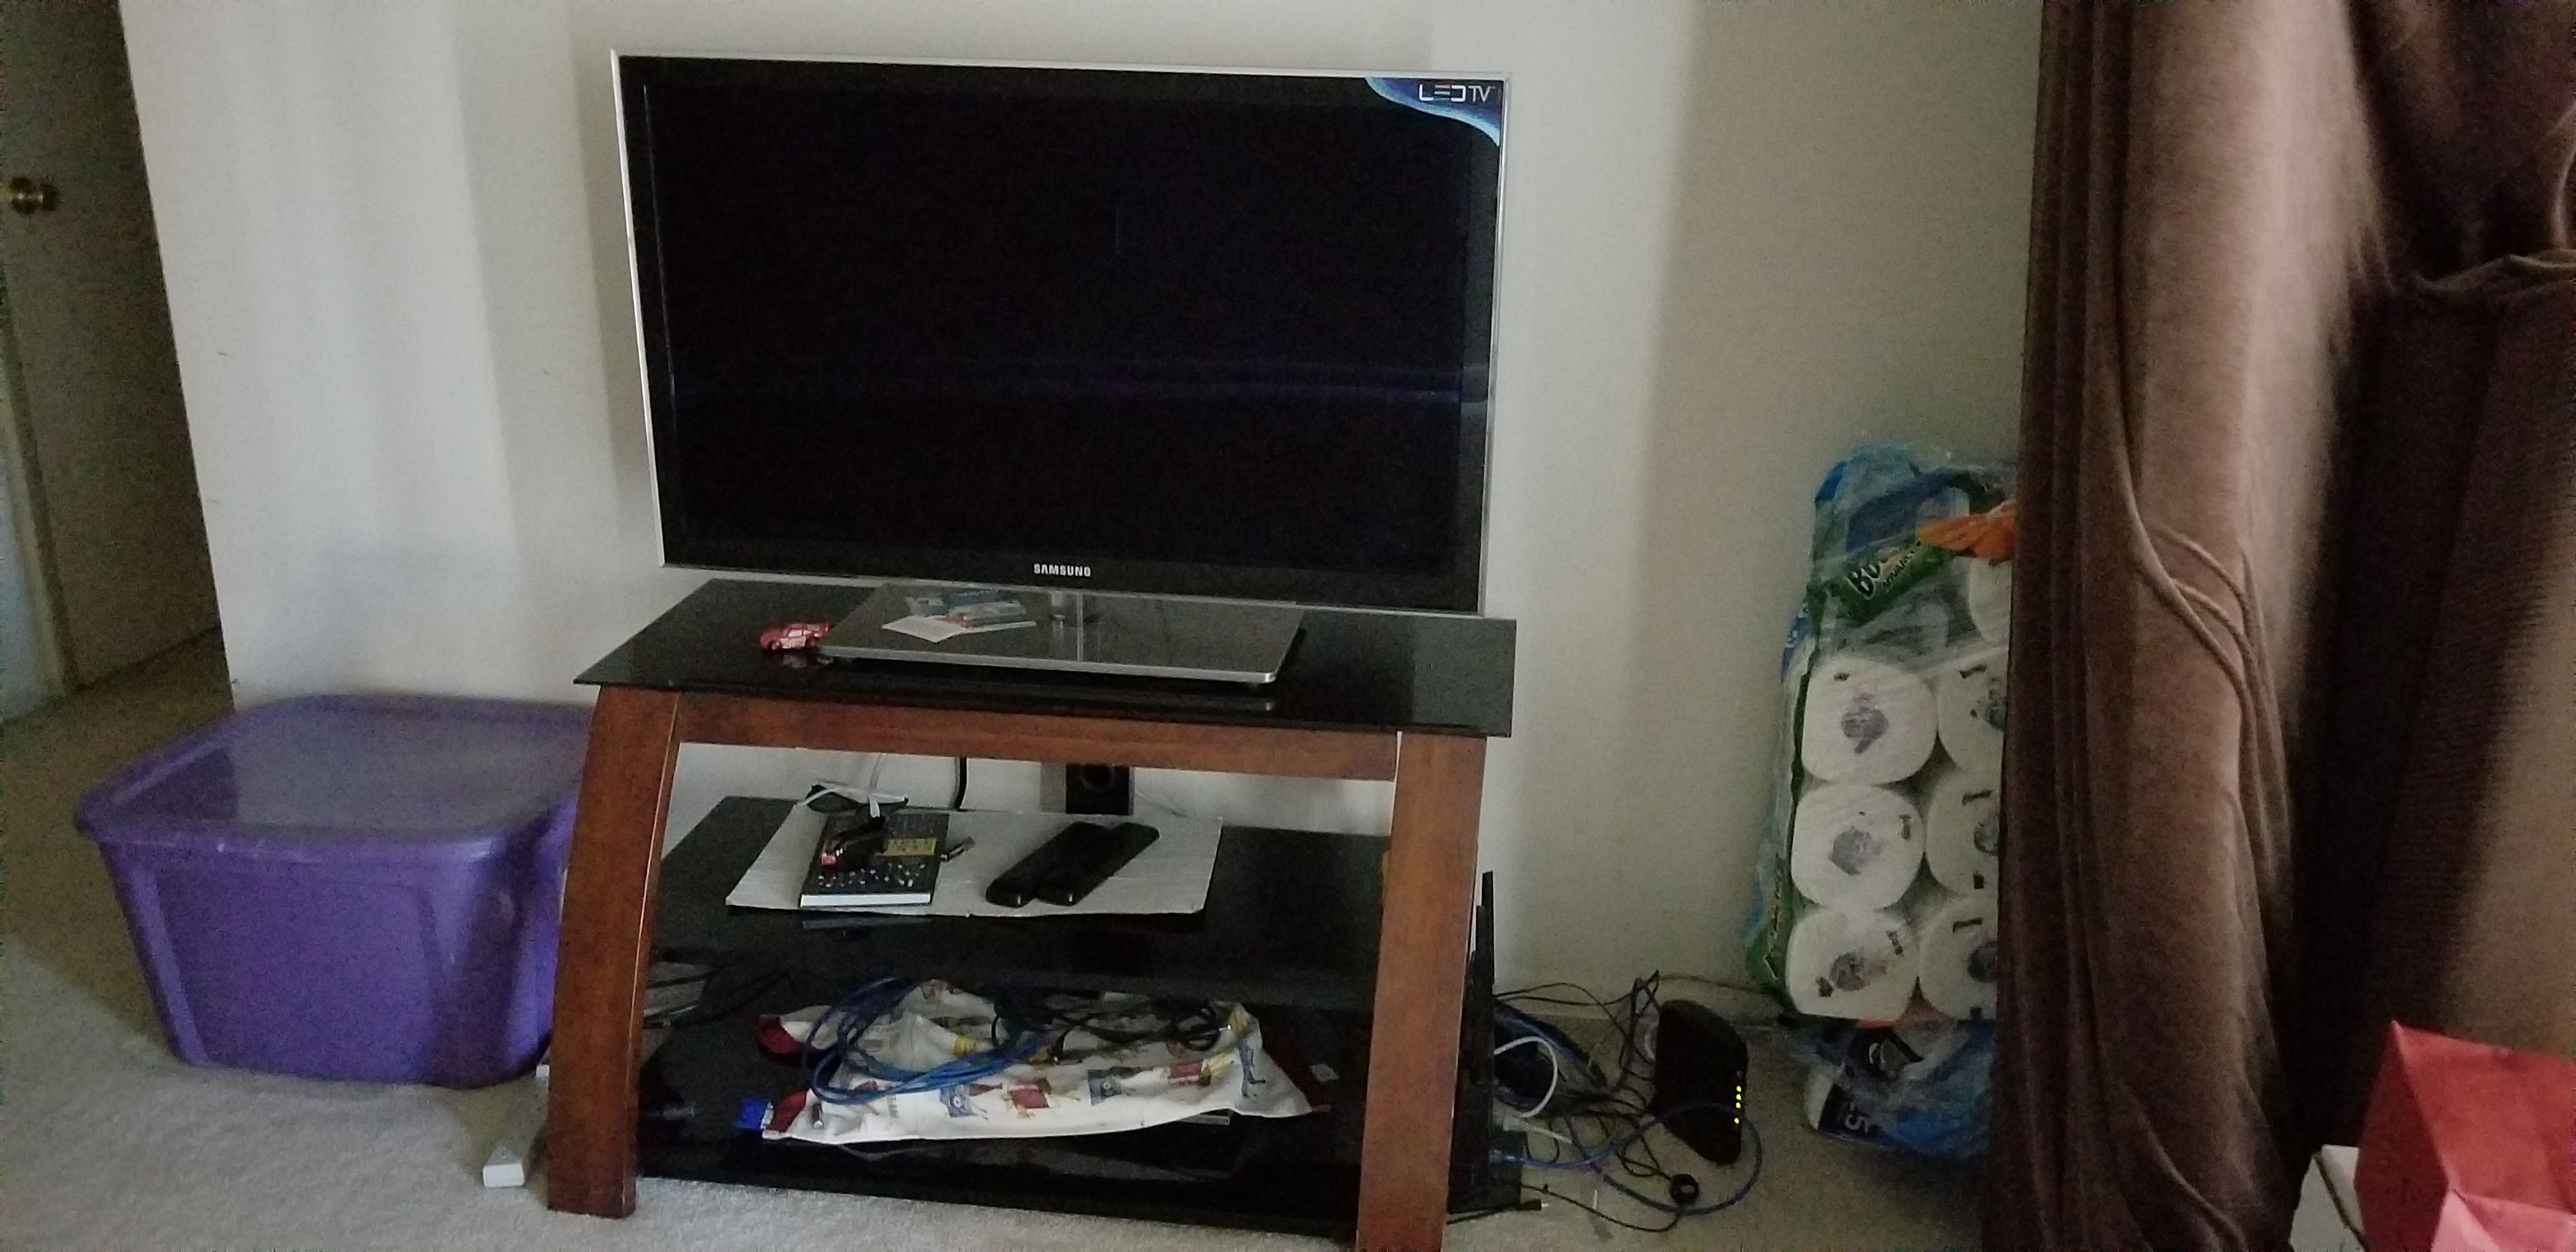 Samsung LED TV with TV stand.